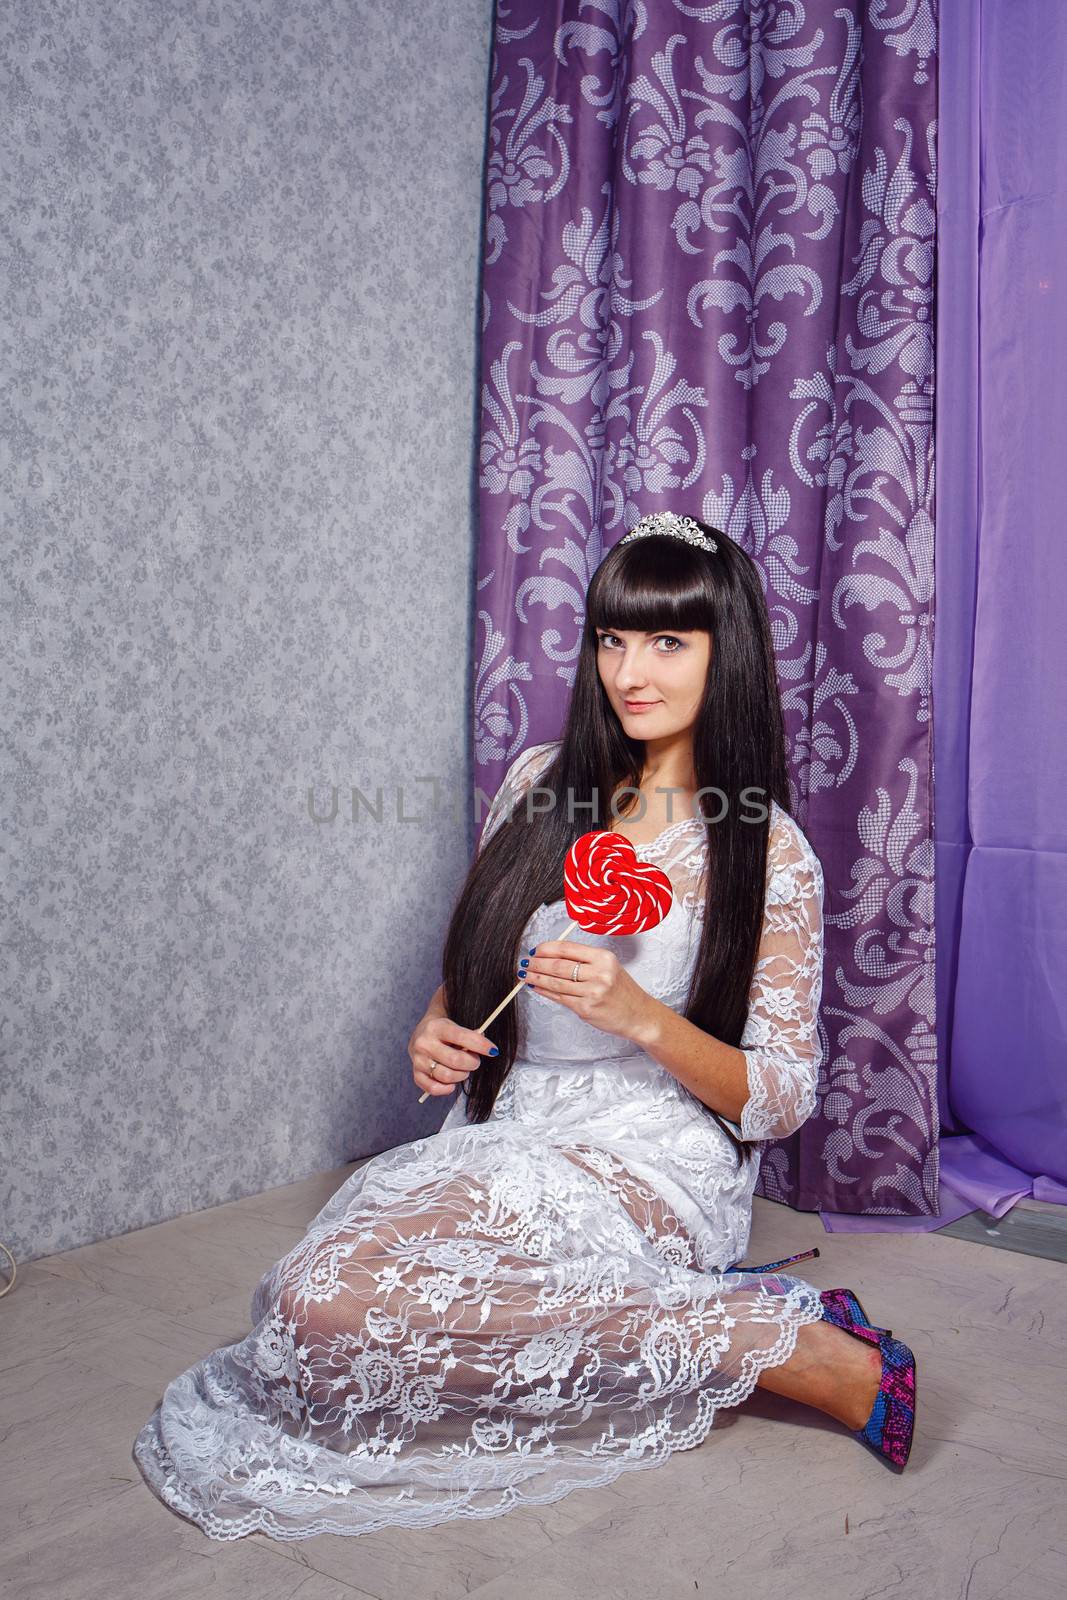 Attractive young girl sitting on the floor and holding a heart-shaped lollipop